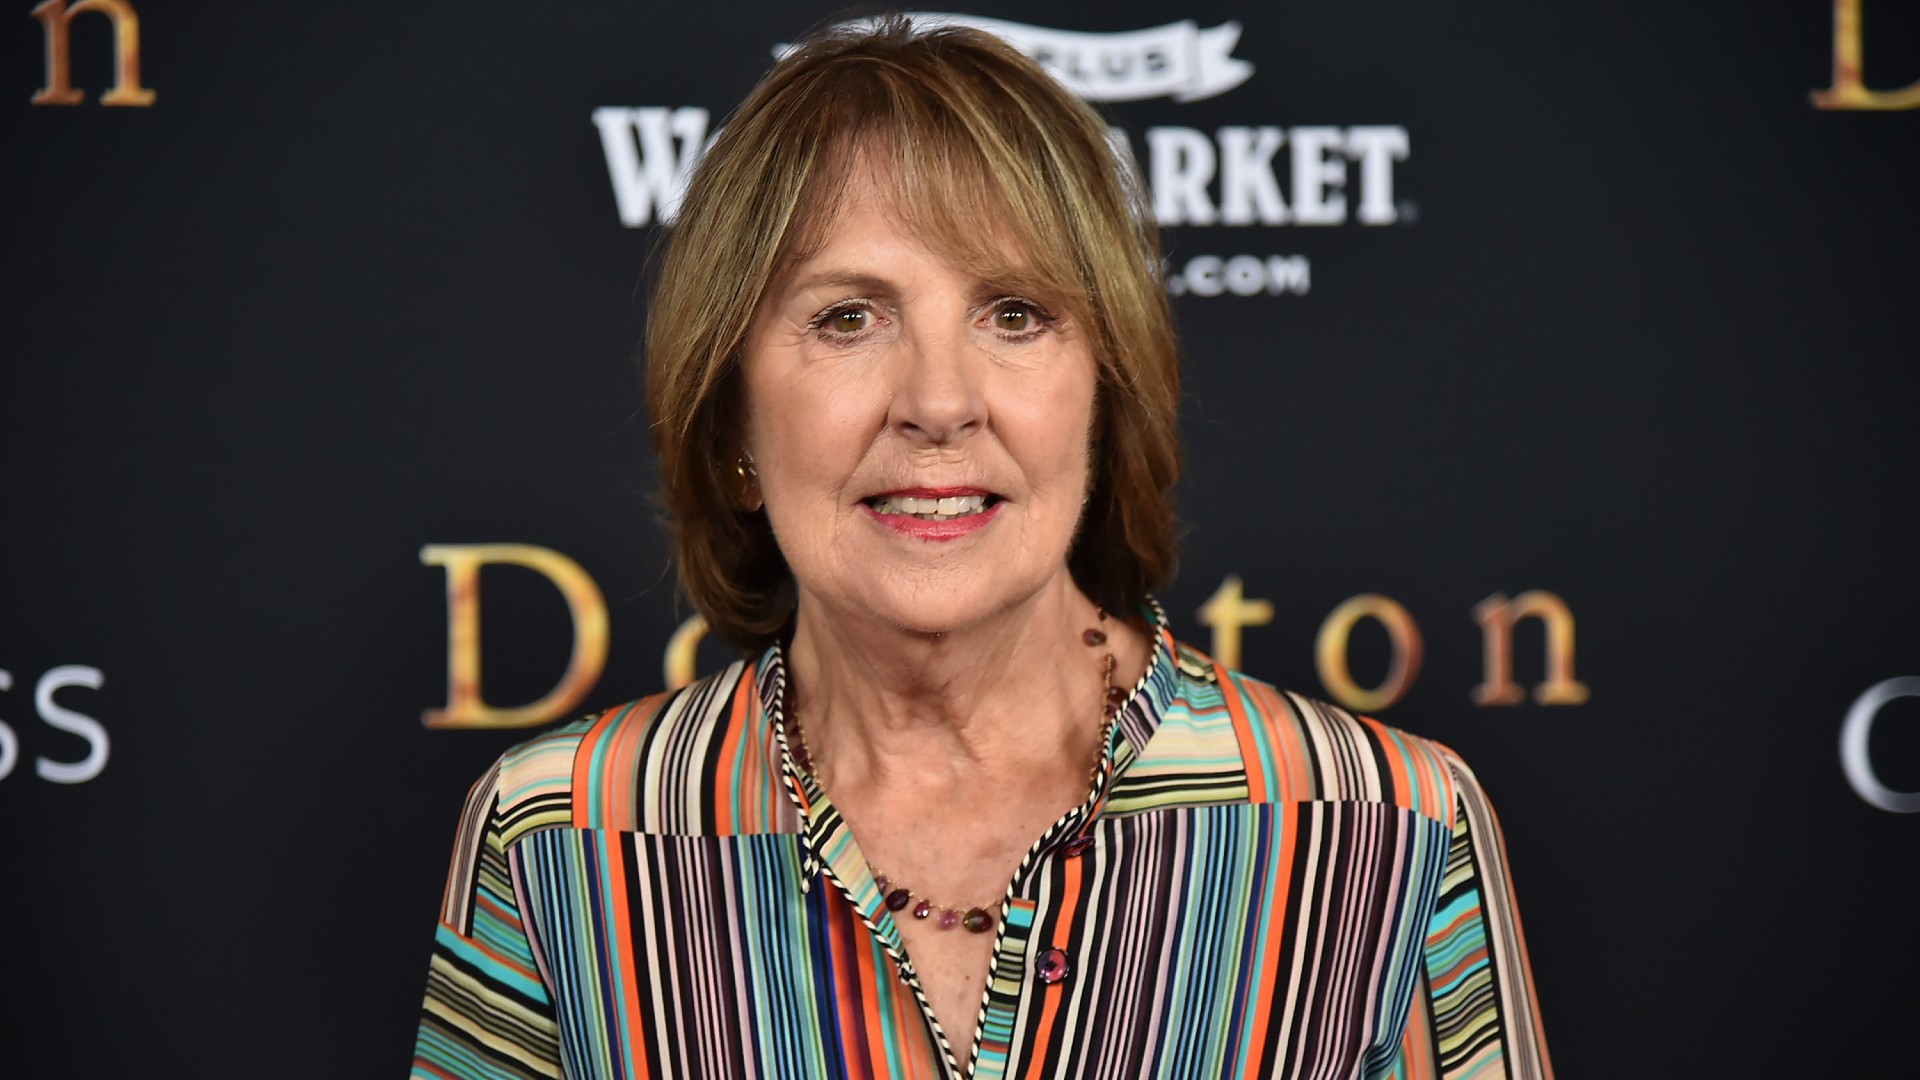 British Icon of the Week: Dame Penelope Wilton, the Classy Star of 'Downton Abbey' and 'After Life'